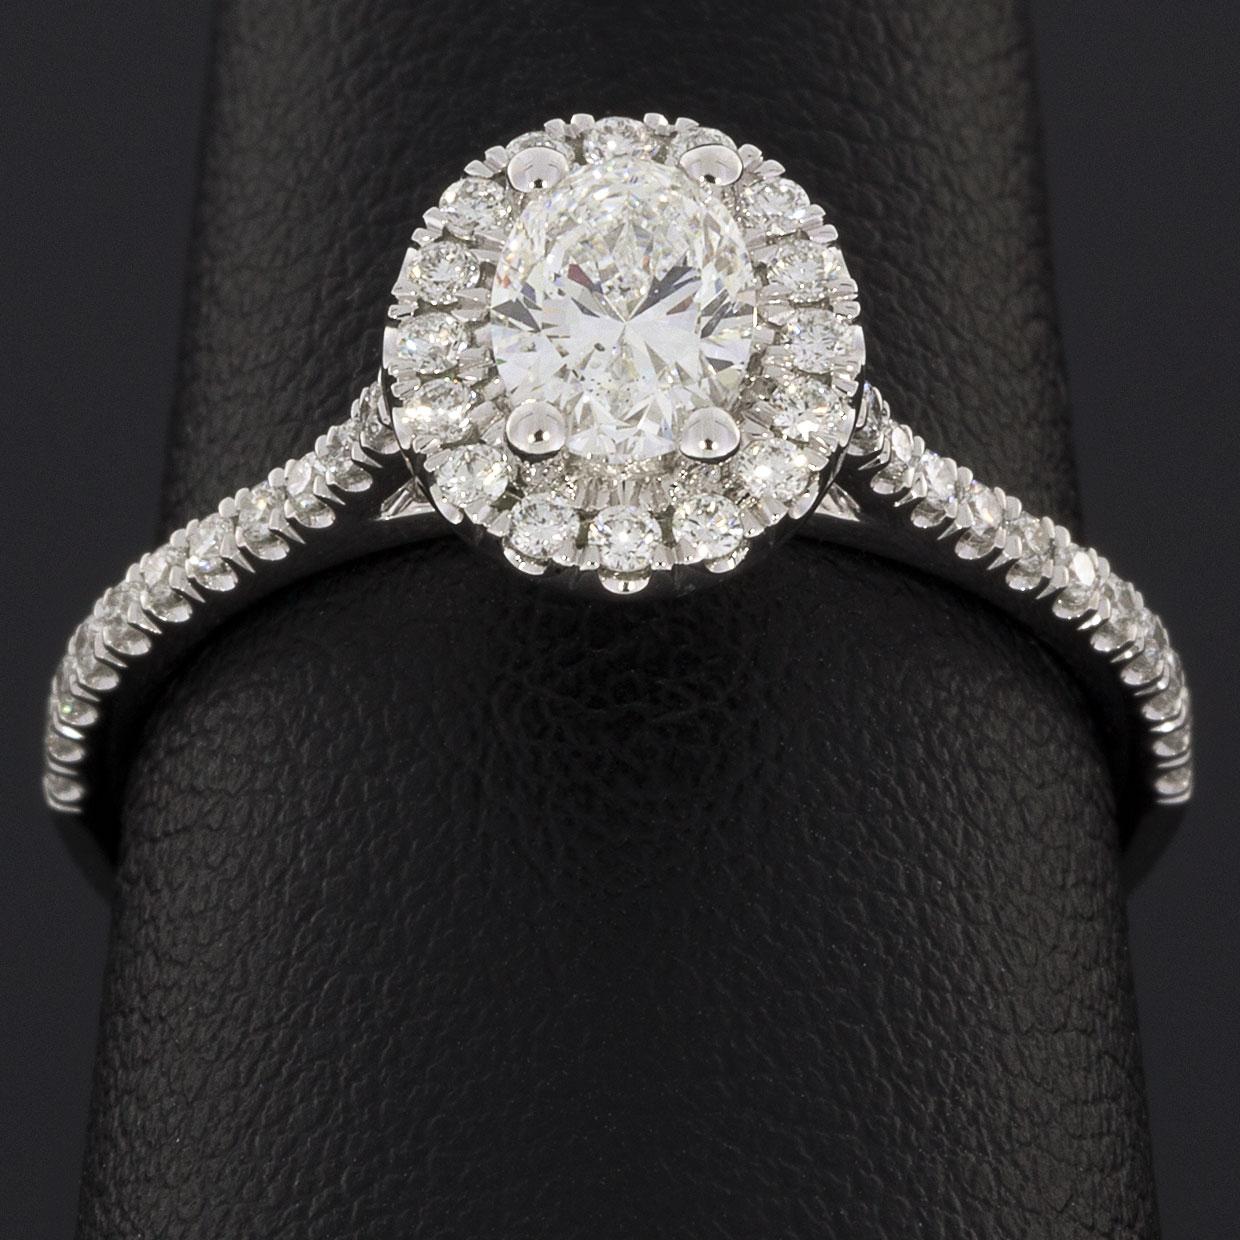 Women's Martin Flyer White Gold GIA Certified Oval Diamond Halo Engagement Ring